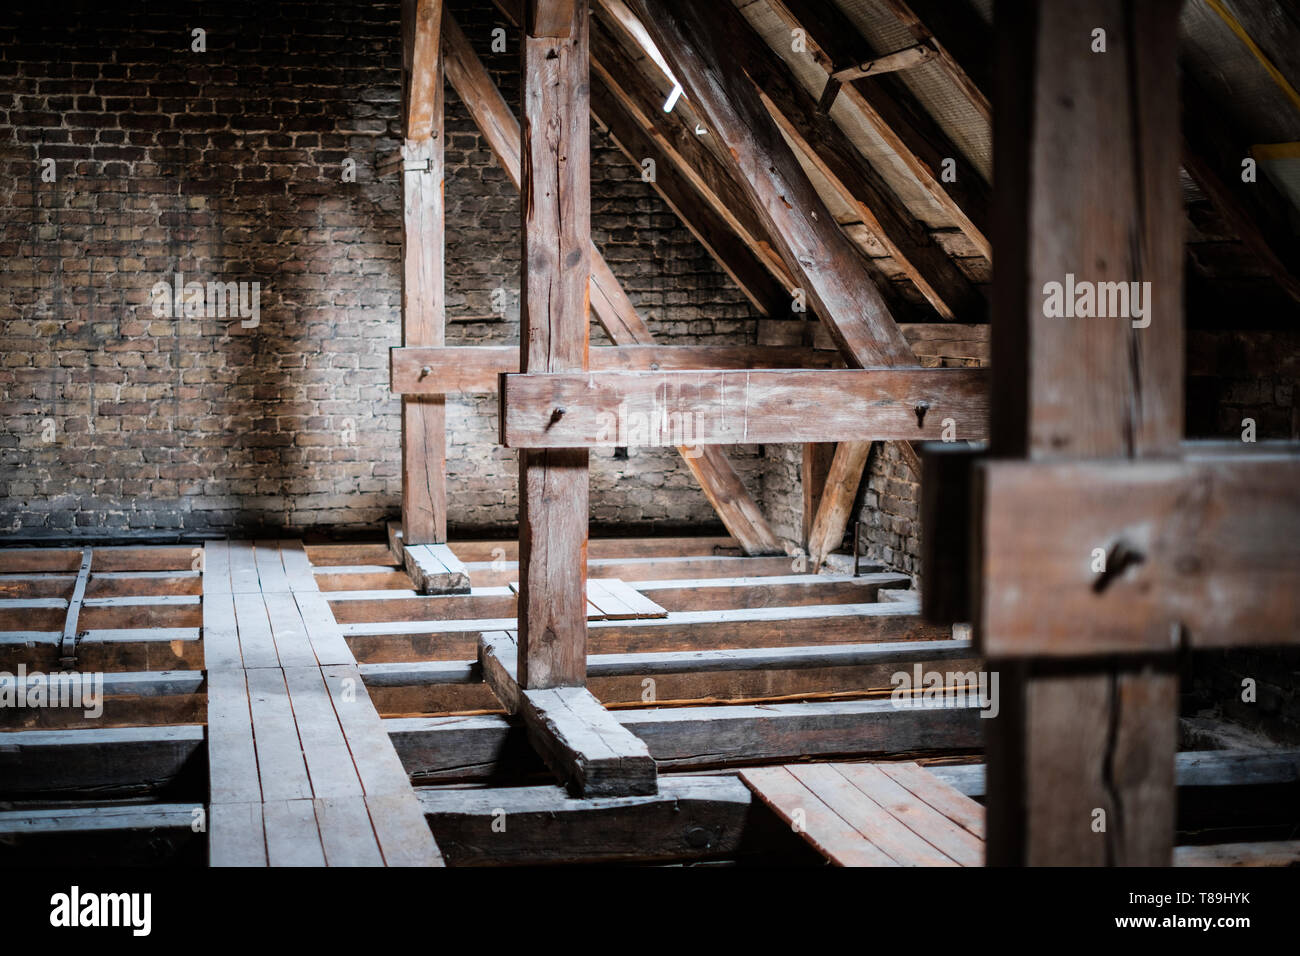 roof beams in old, empty attic / loft before renovation / construction concept - Stock Photo